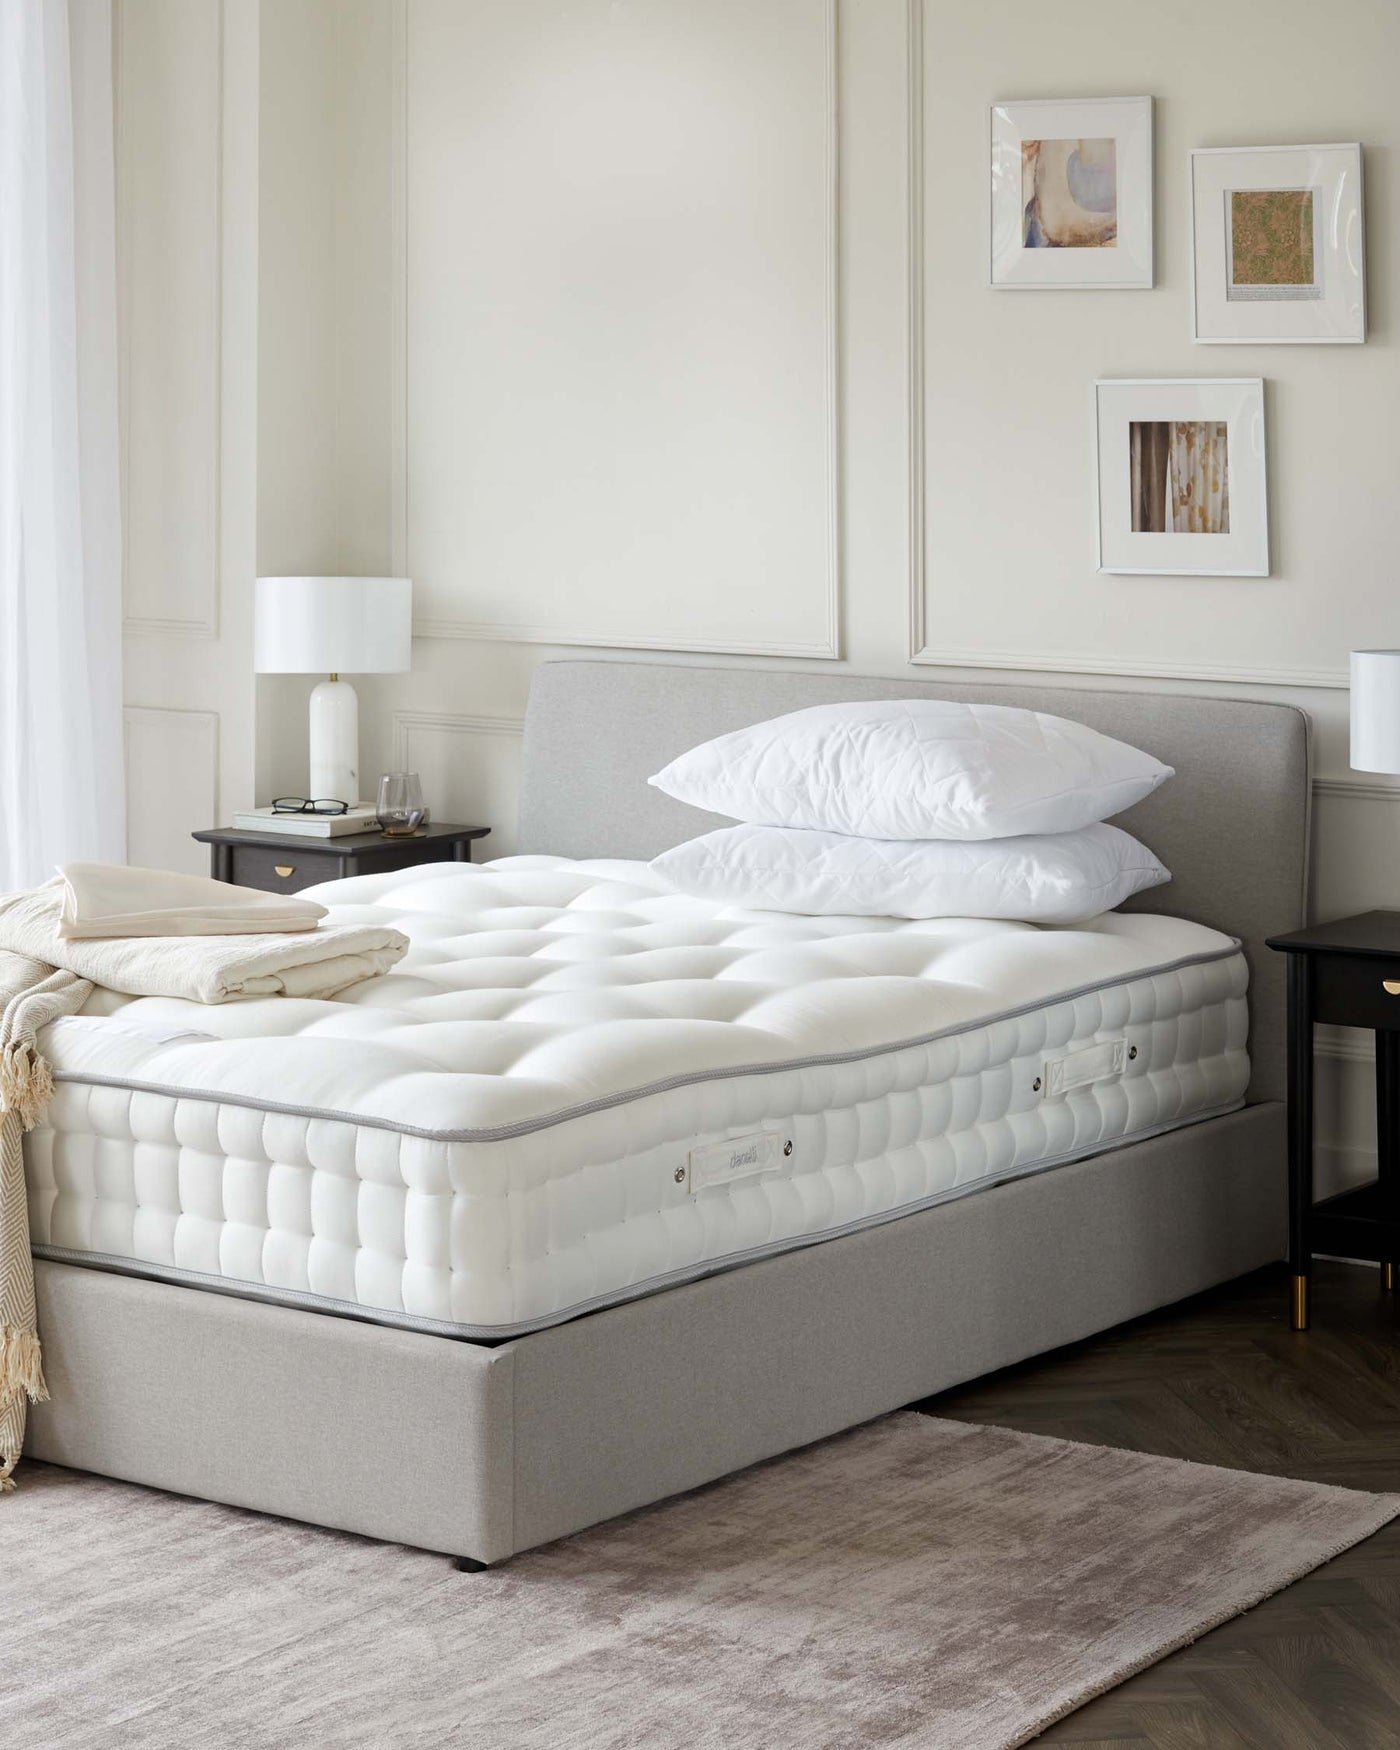 Luxurious upholstered divan bed with a plush pillow-top mattress, flanked by a small round side table with a contemporary lamp atop, set against a neutral-toned backdrop with minimalist wall art and a soft beige area rug.